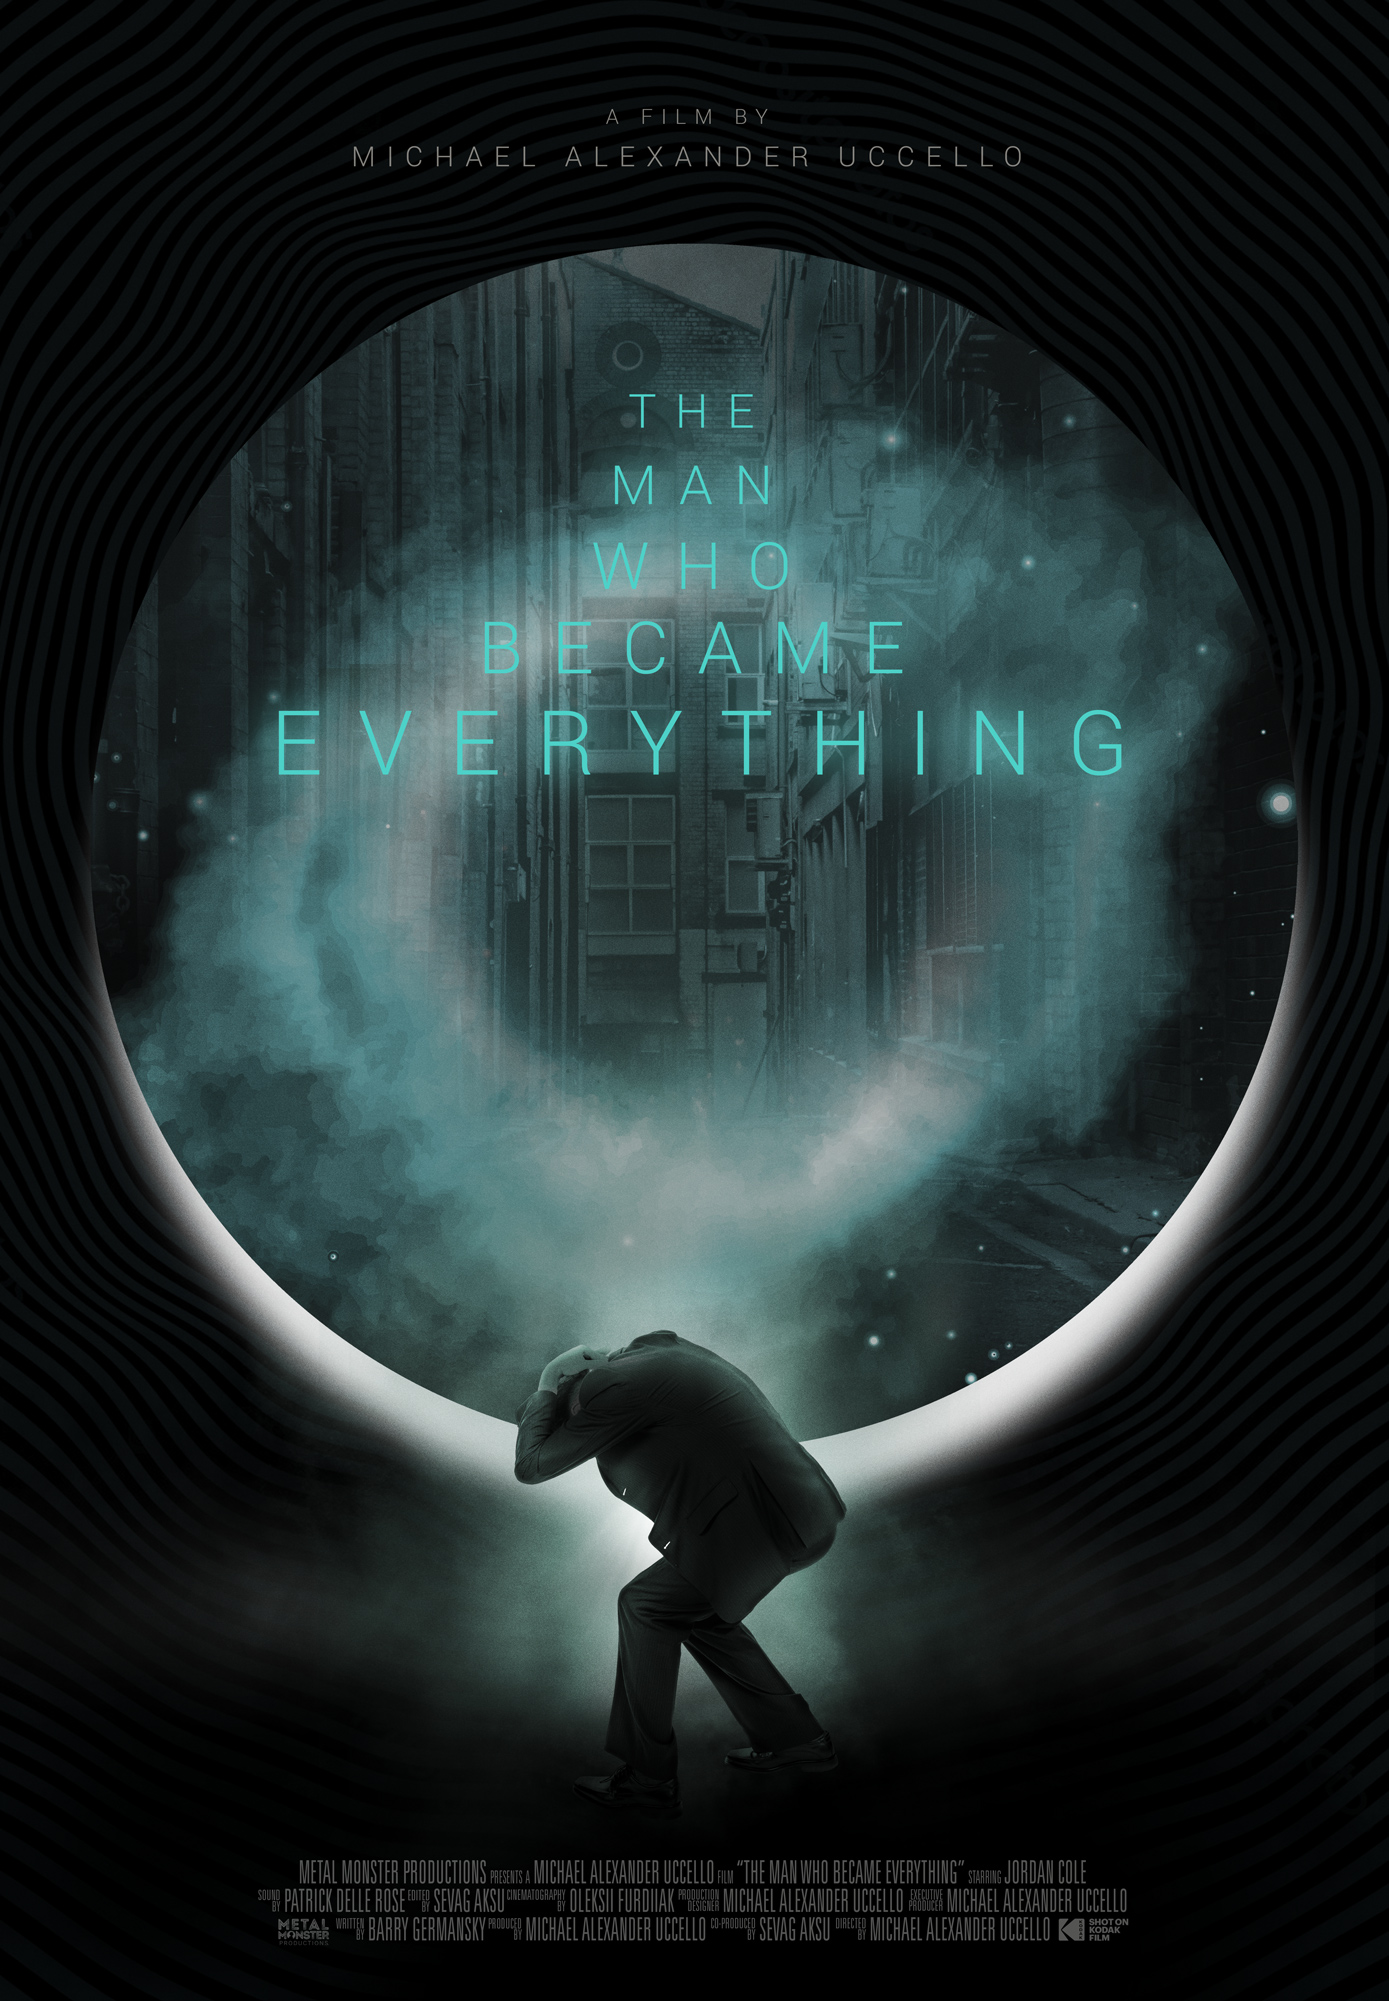 the man who became everything by Michael Alexander Uccello